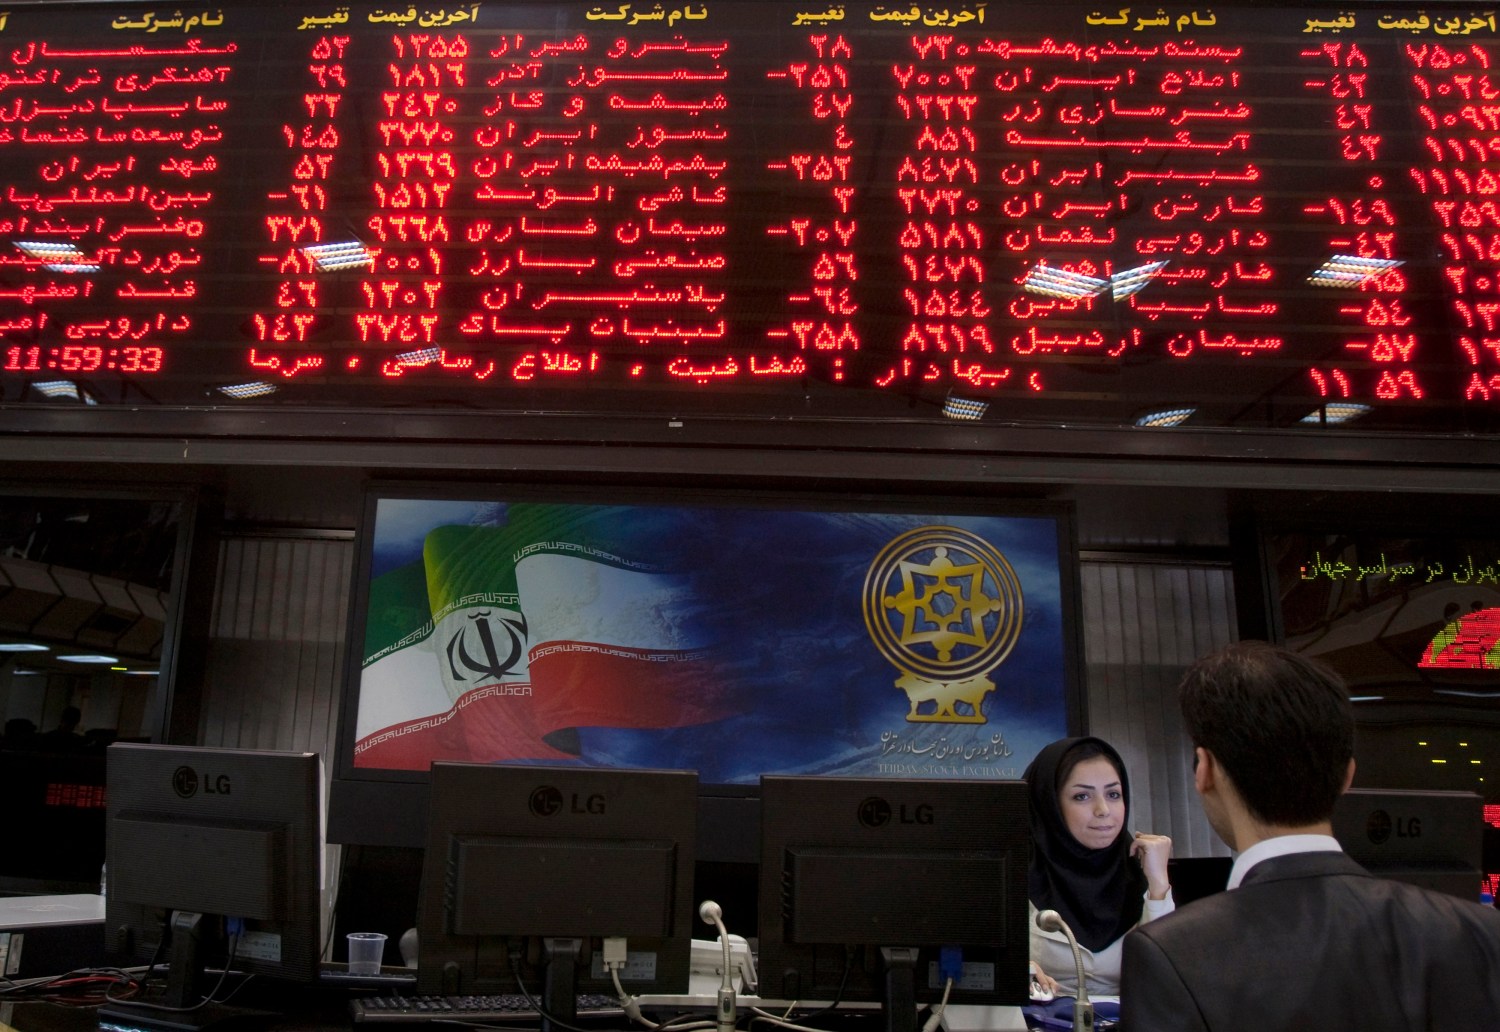 EDITORS' NOTE: Reuters and other foreign media are subject to Iranian restrictions on their ability to report, film or take pictures in Tehran. A trader speaks with a stock market official beneath the electronic board at the Tehran stock exchange September 15, 2010. While U.S. diplomats were busy upping Iran's economic punishment over nuclear activities Washington fears are aimed at making a bomb, Iranian shares, which might have been expected to fall, have, instead, gone through the roof. Picture taken September 15, 2010. To match Feature IRAN-ECONOMY/BOURSE REUTERS/Caren Firouz (IRAN - Tags: BUSINESS) - GM1E69U0R0301